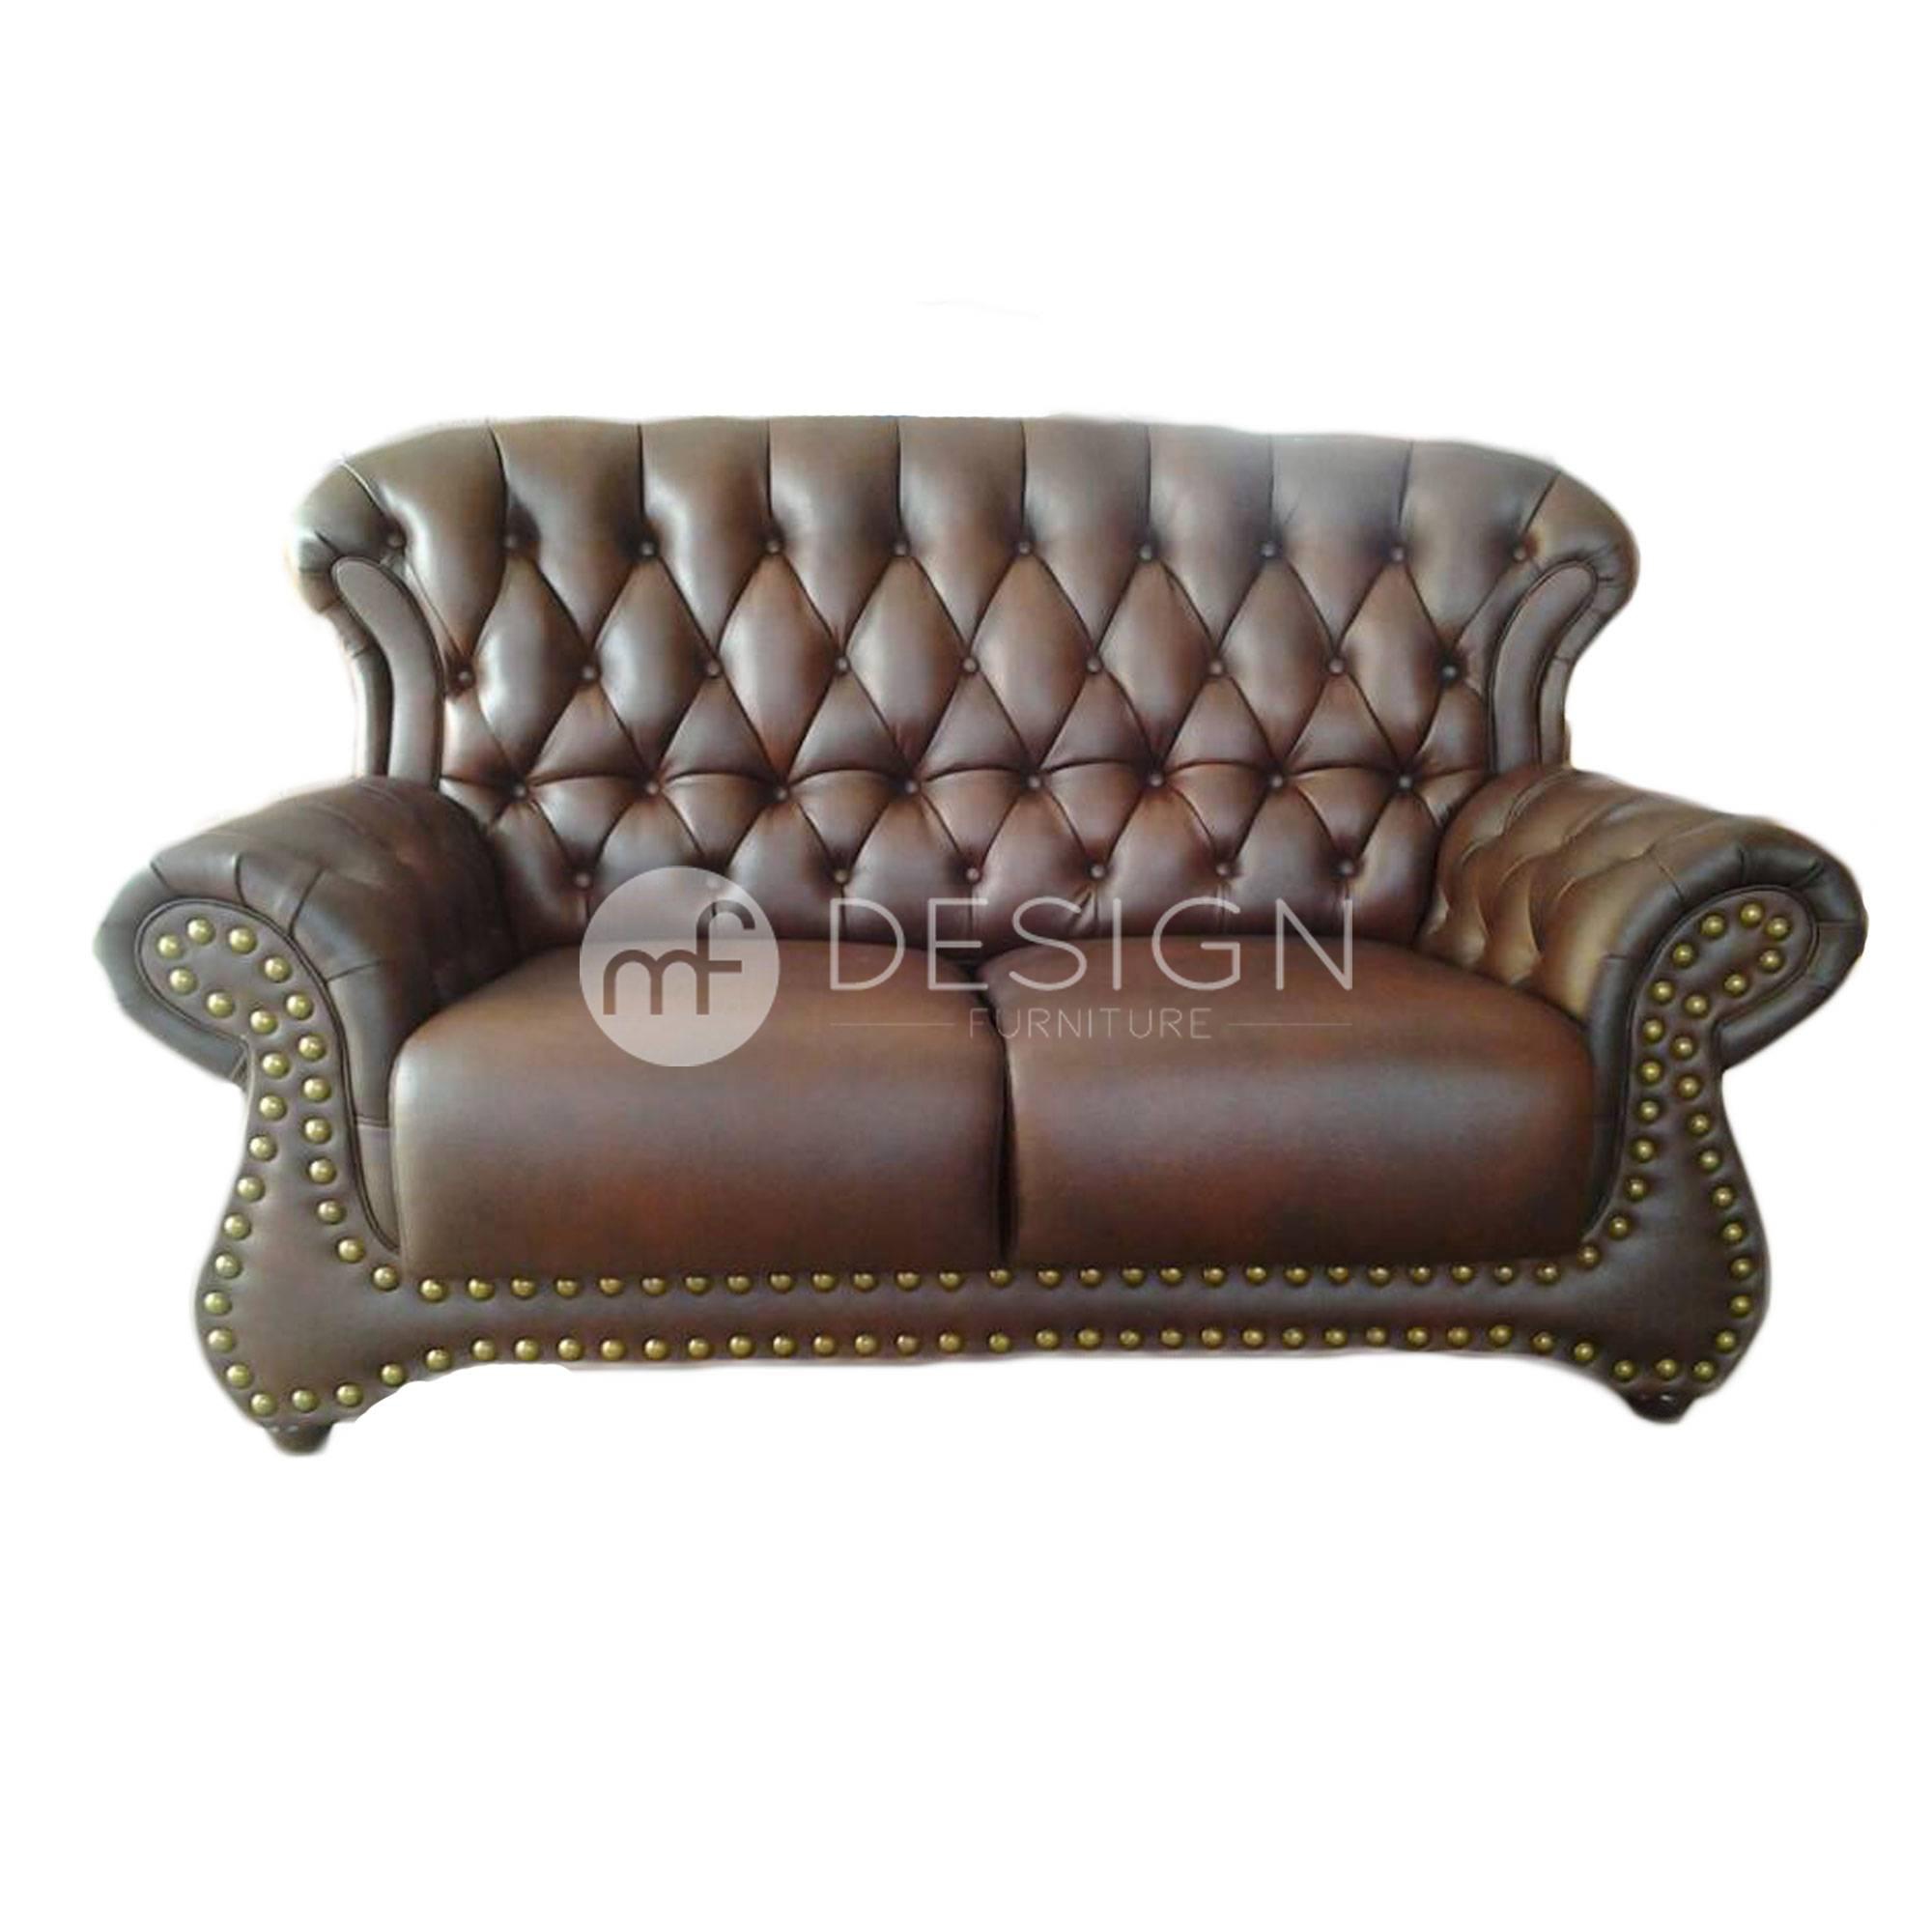 MF DESIGN CHESTERFIELD HIGH BACK 2 SE End 3 5 2020 246 PM